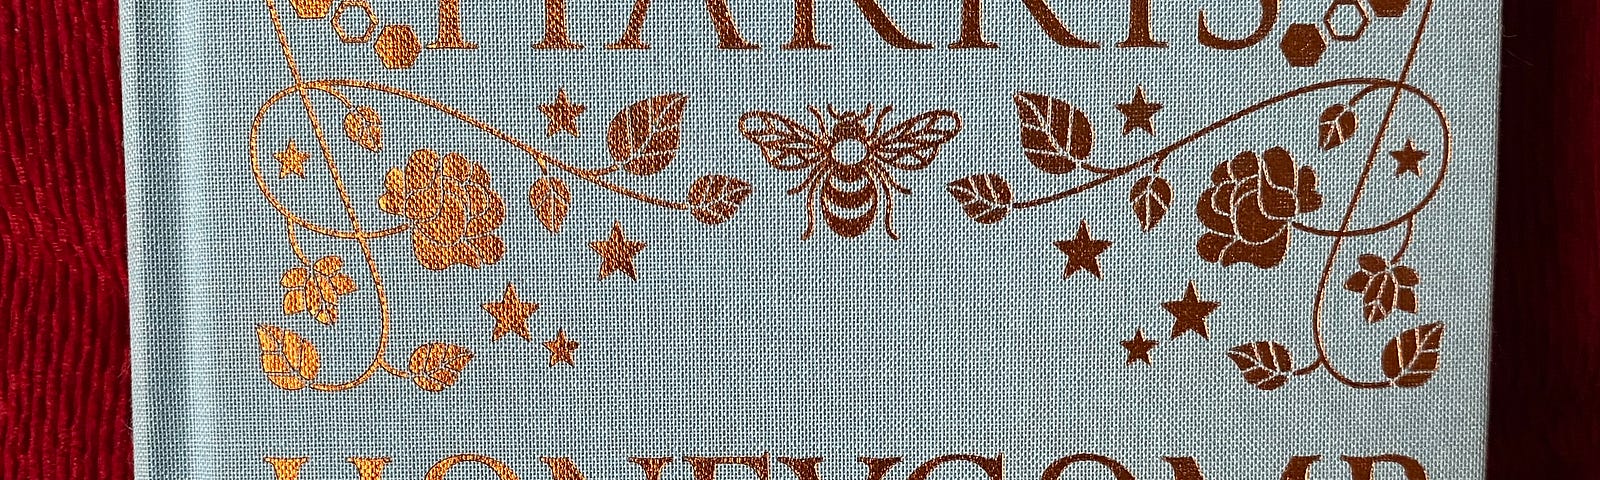 A book cover with woven plants and bees on it.